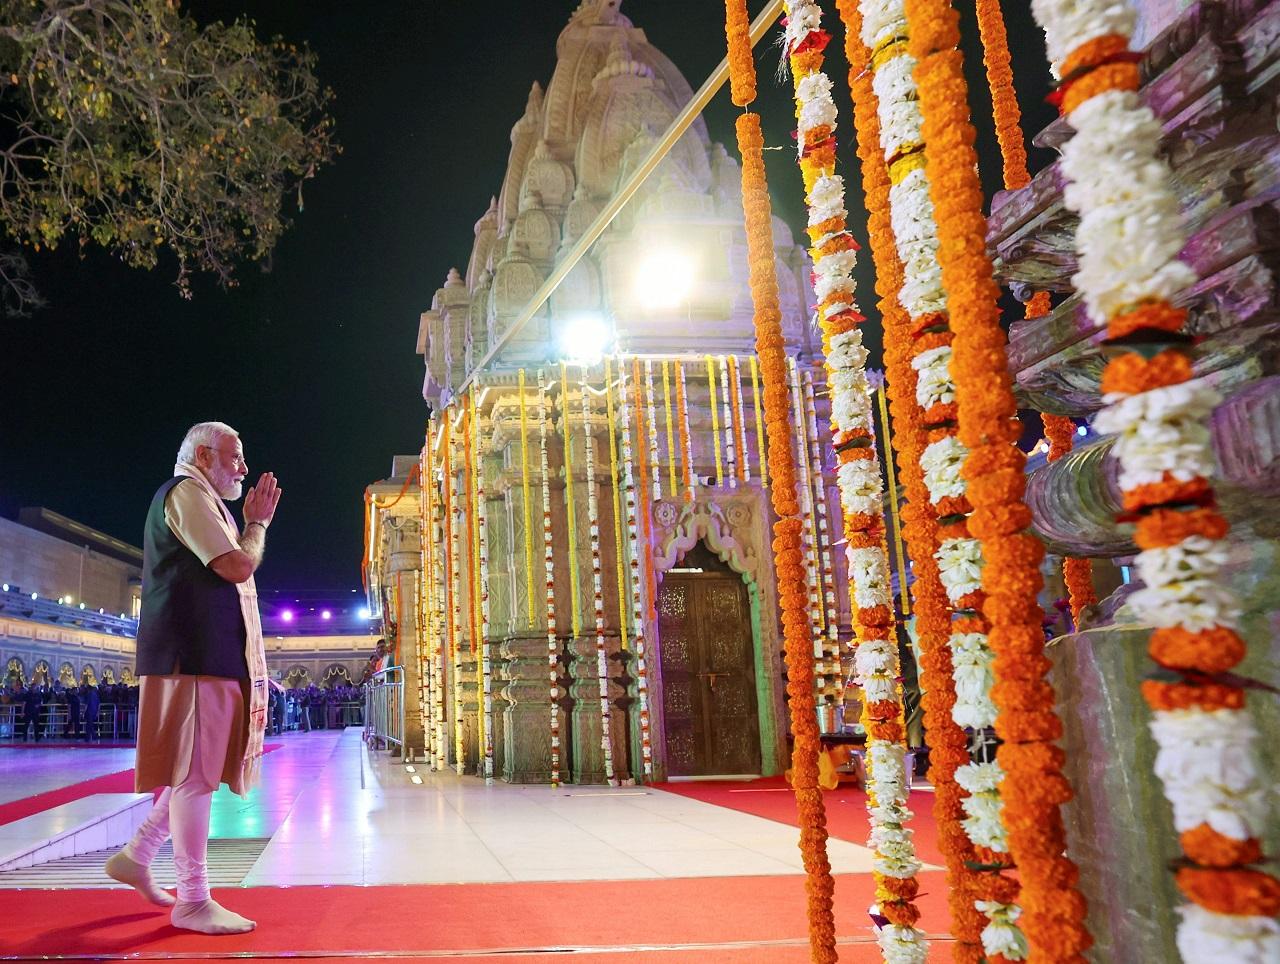 In a post on X, PM Modi also shared a video of his visit to the temple on Saturday. In the video, he is seen taking part in a puja at the temple